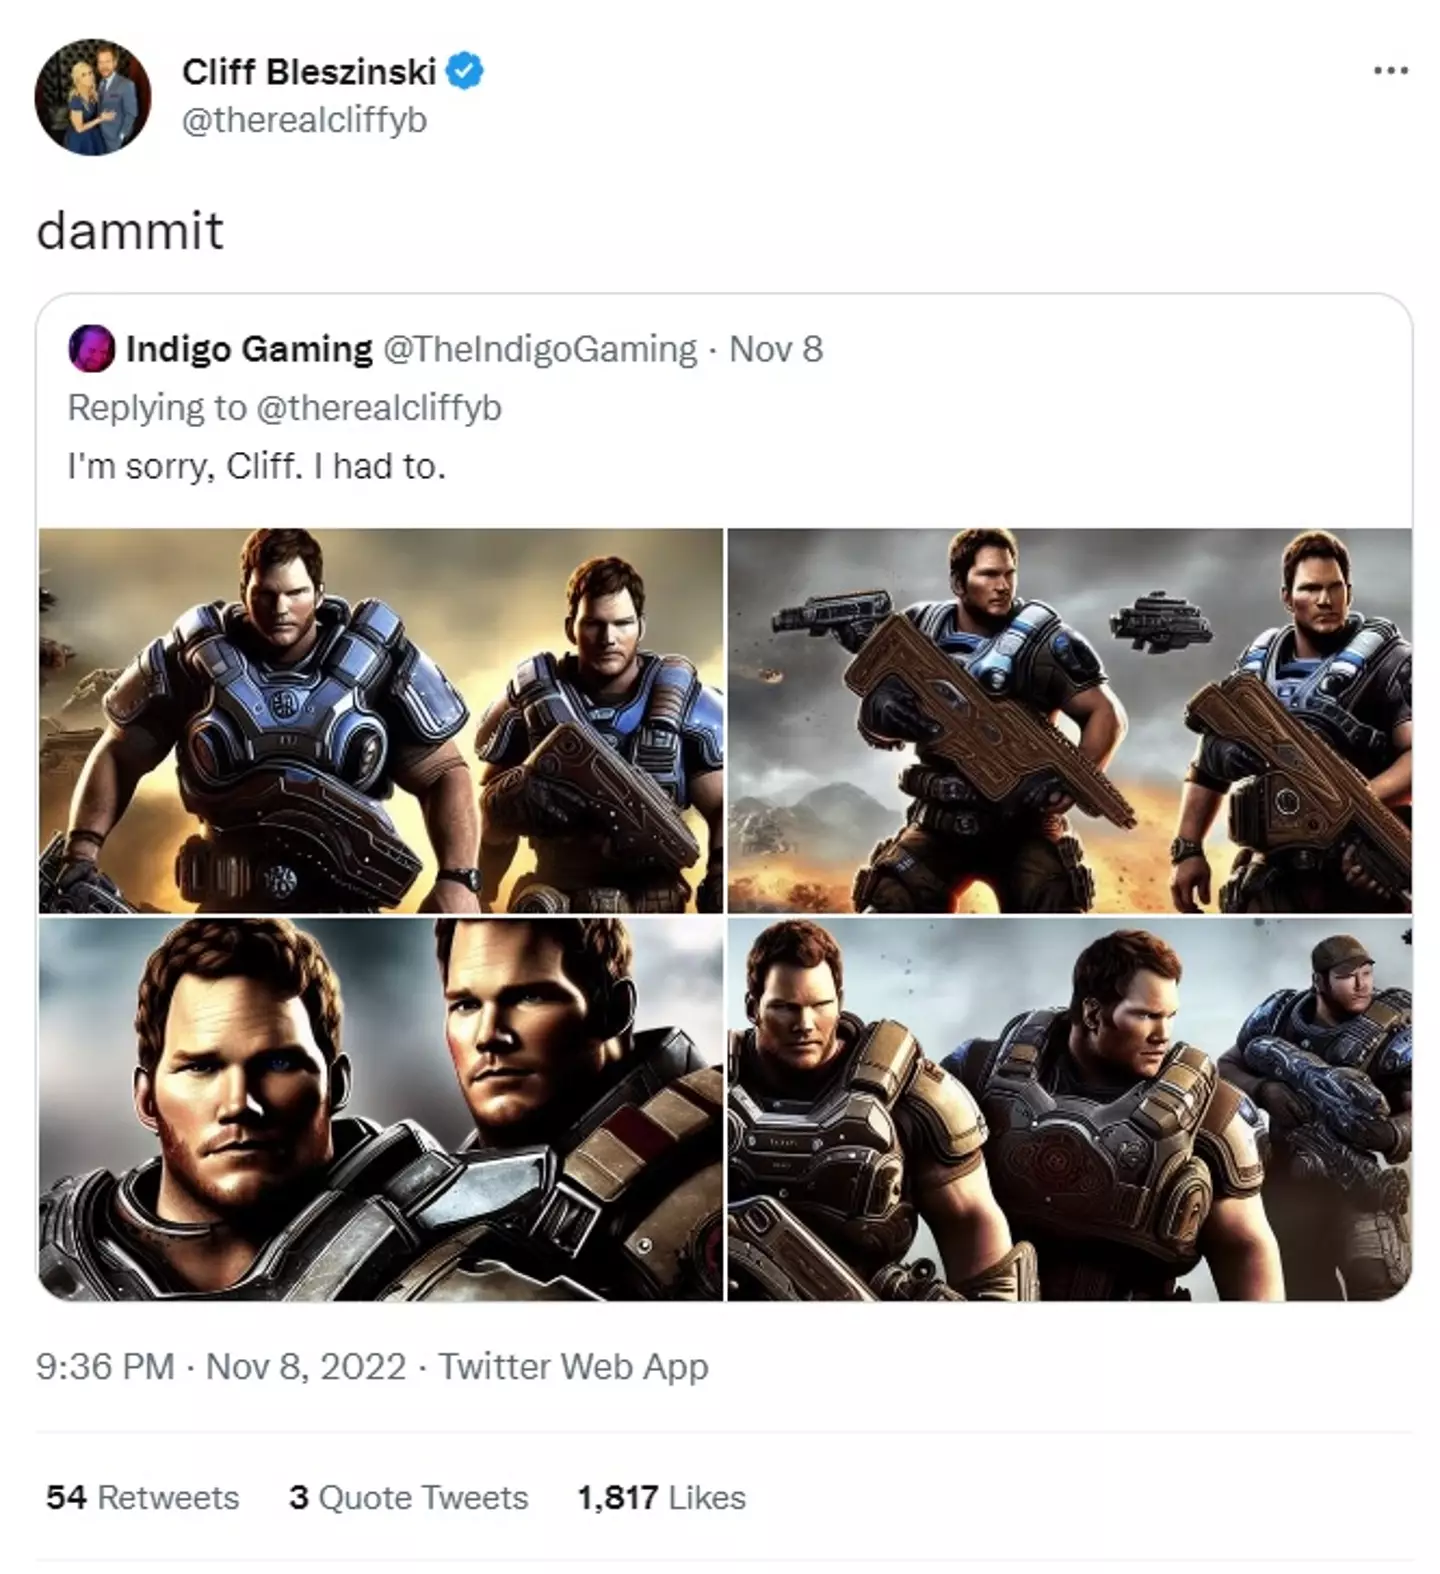 The Gears of War developer also joked around as people shared fanart of Pratt as every character.